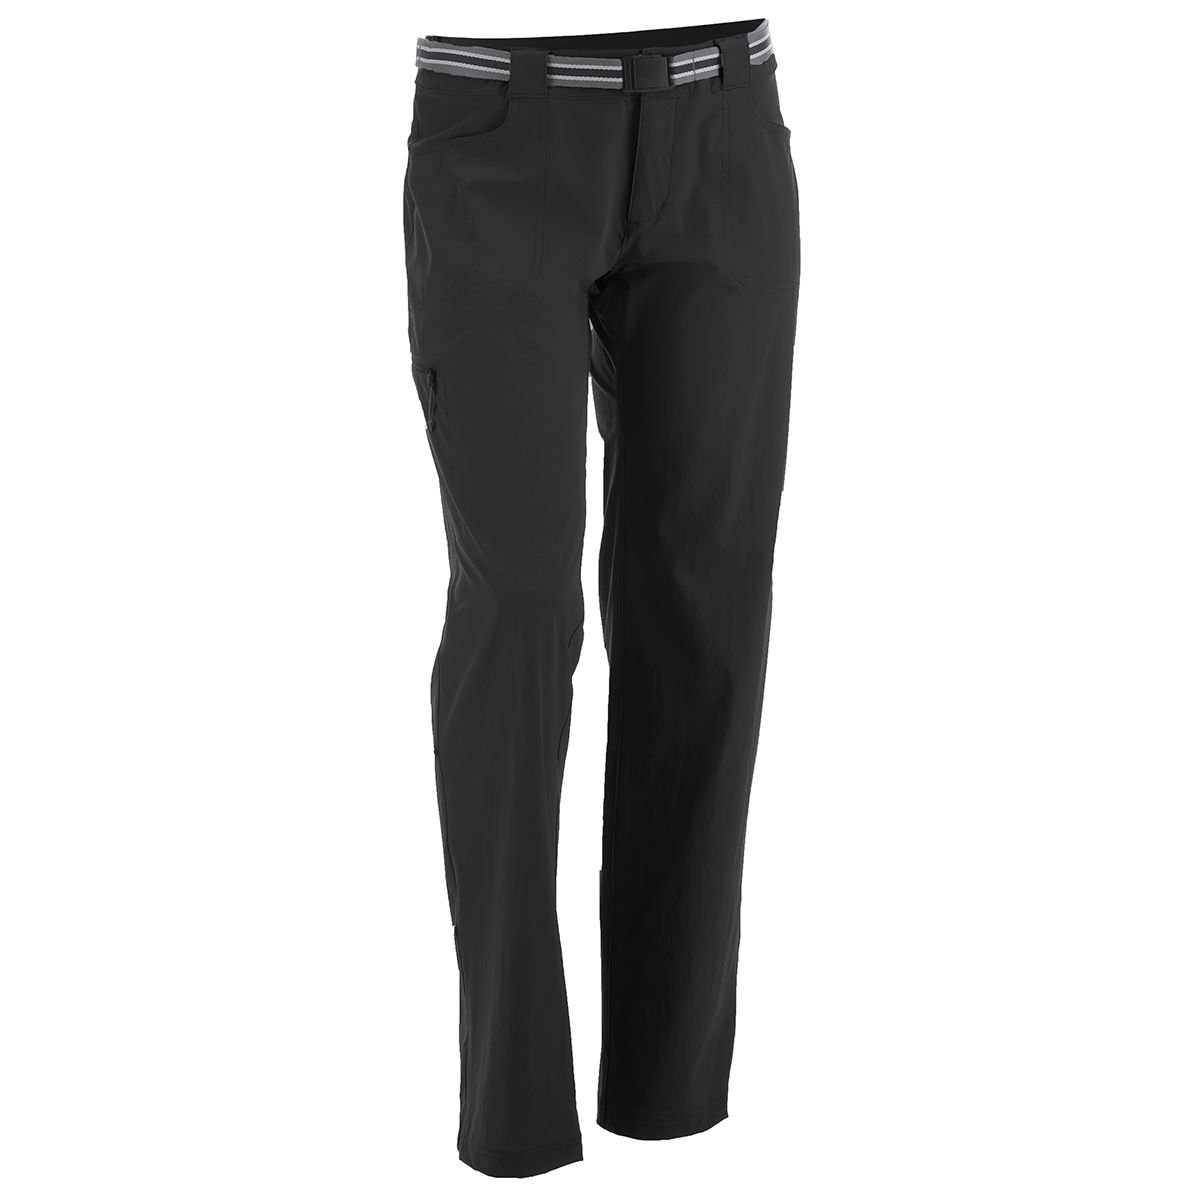 EMS Women's Re-Fusion Hike Tights - Eastern Mountain Sports